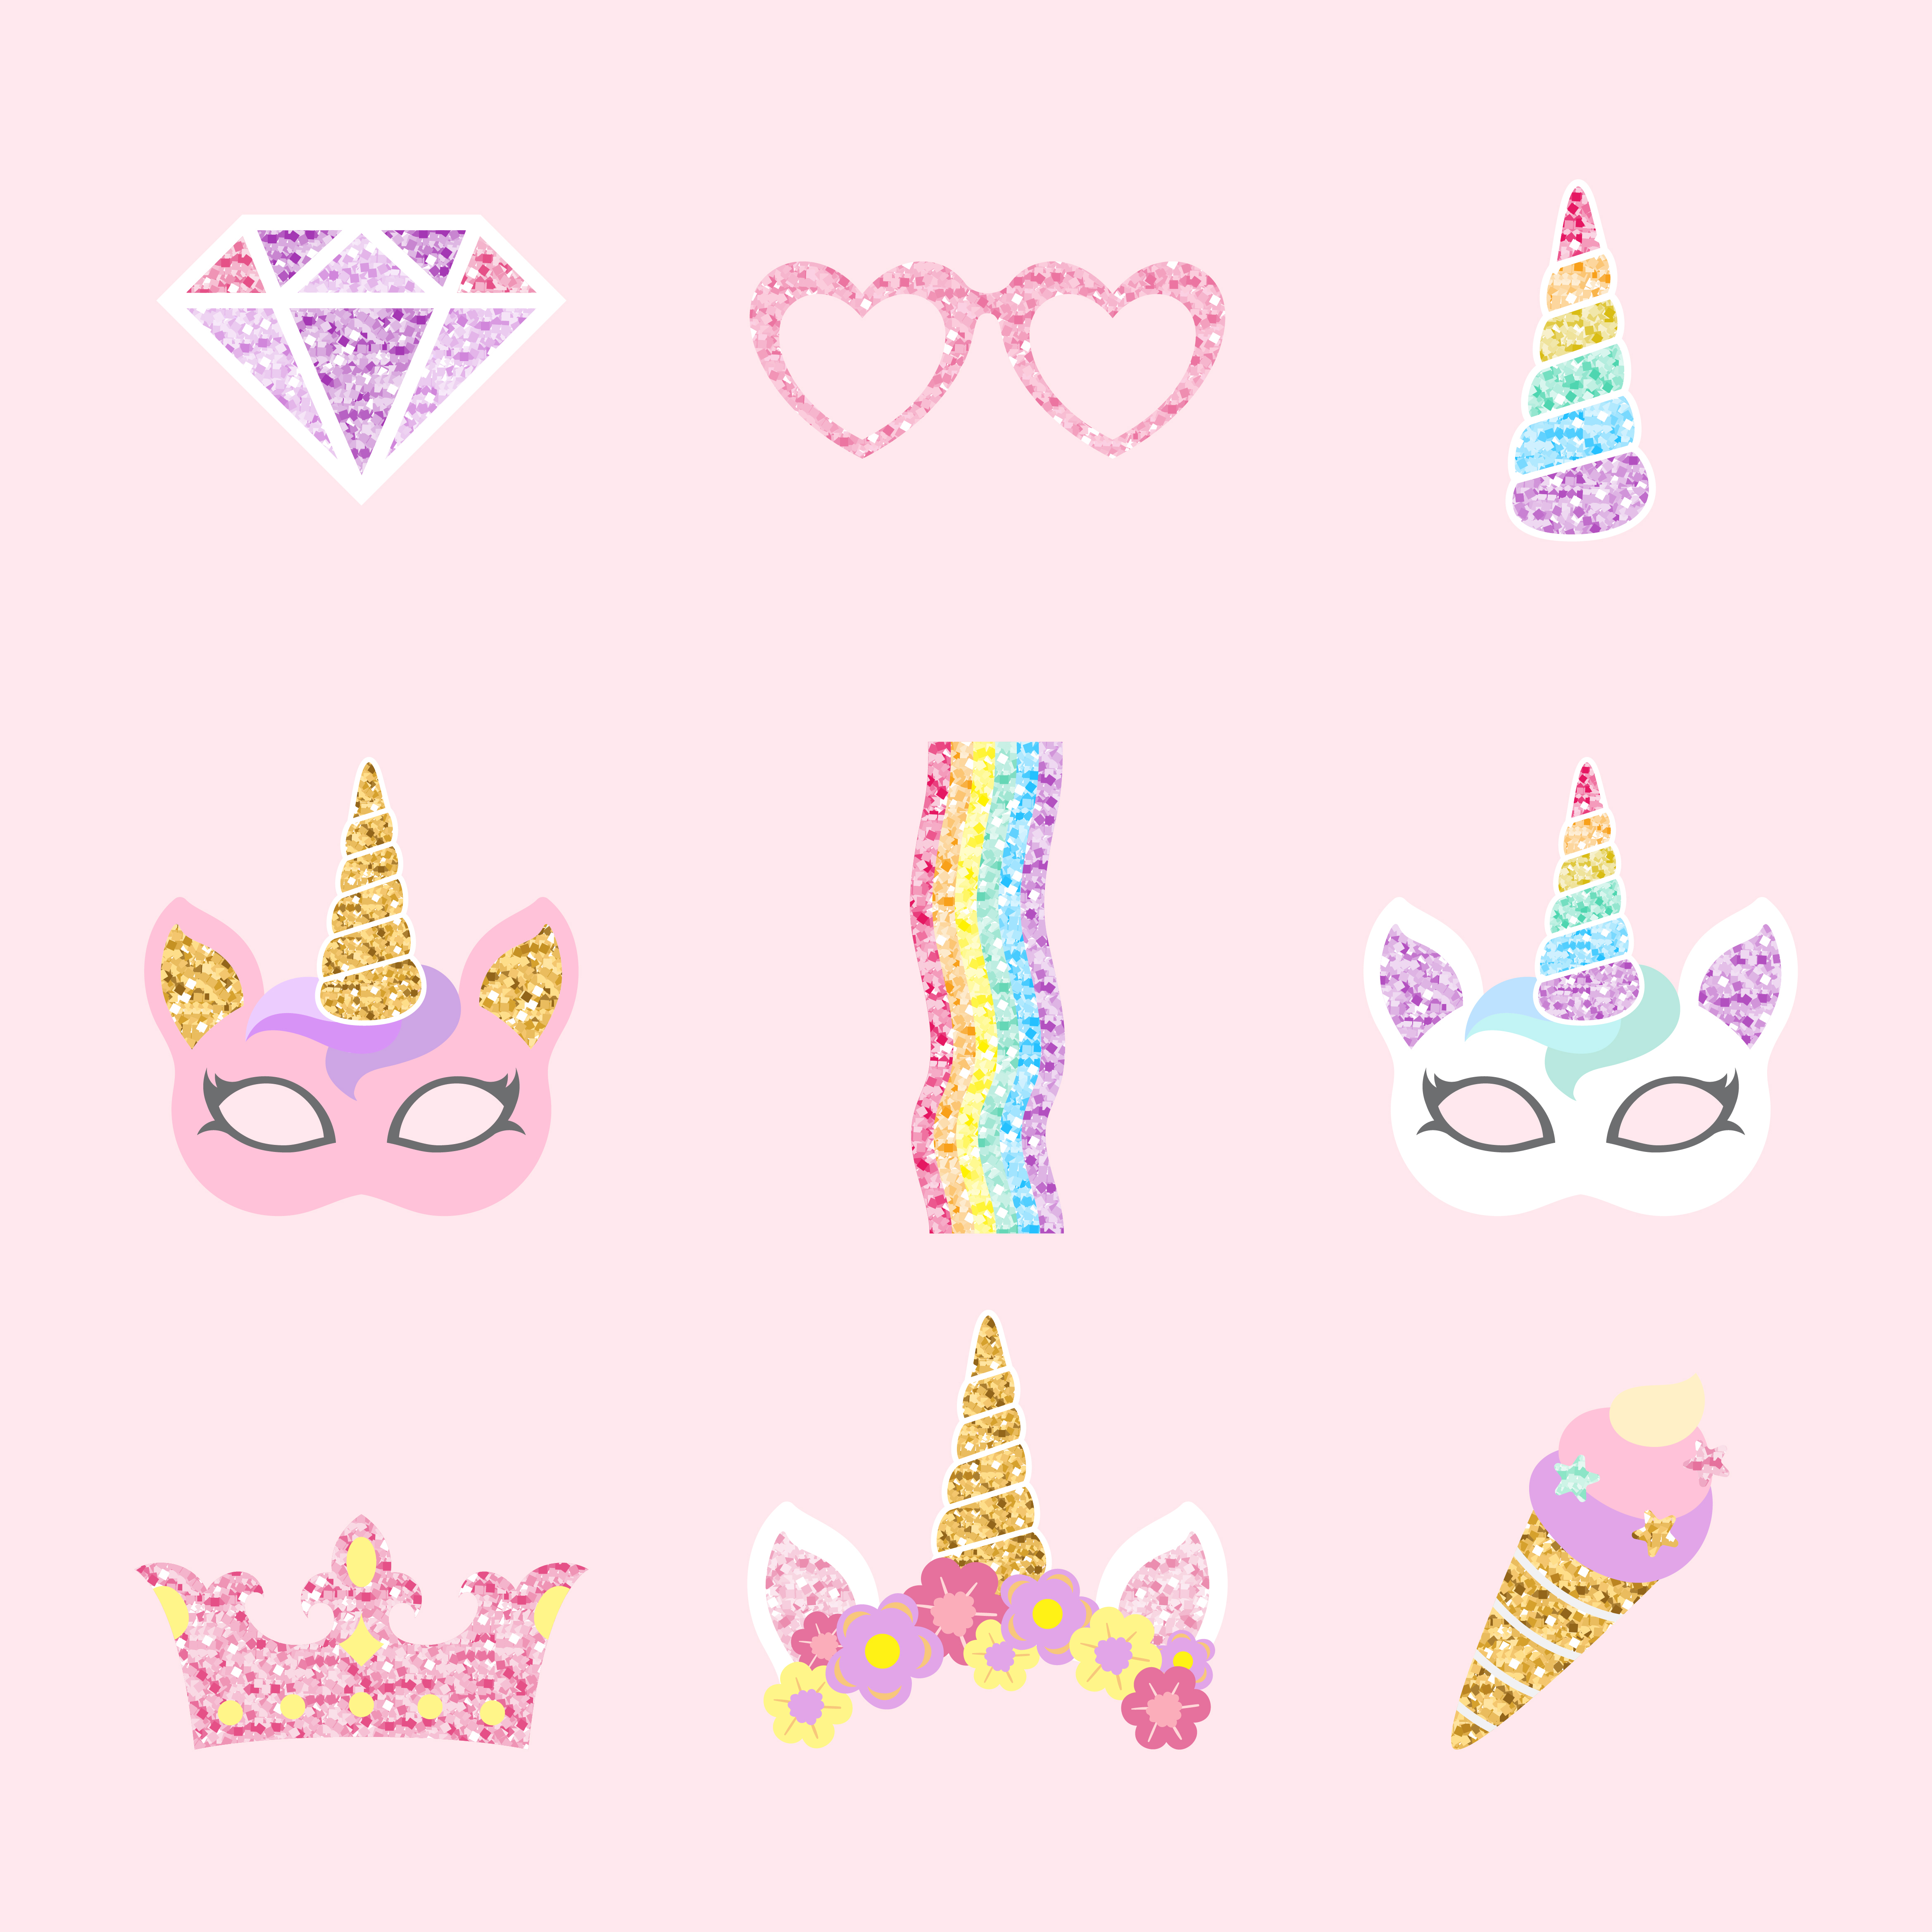 Cute unicorn photo booth party props vector - Download ...